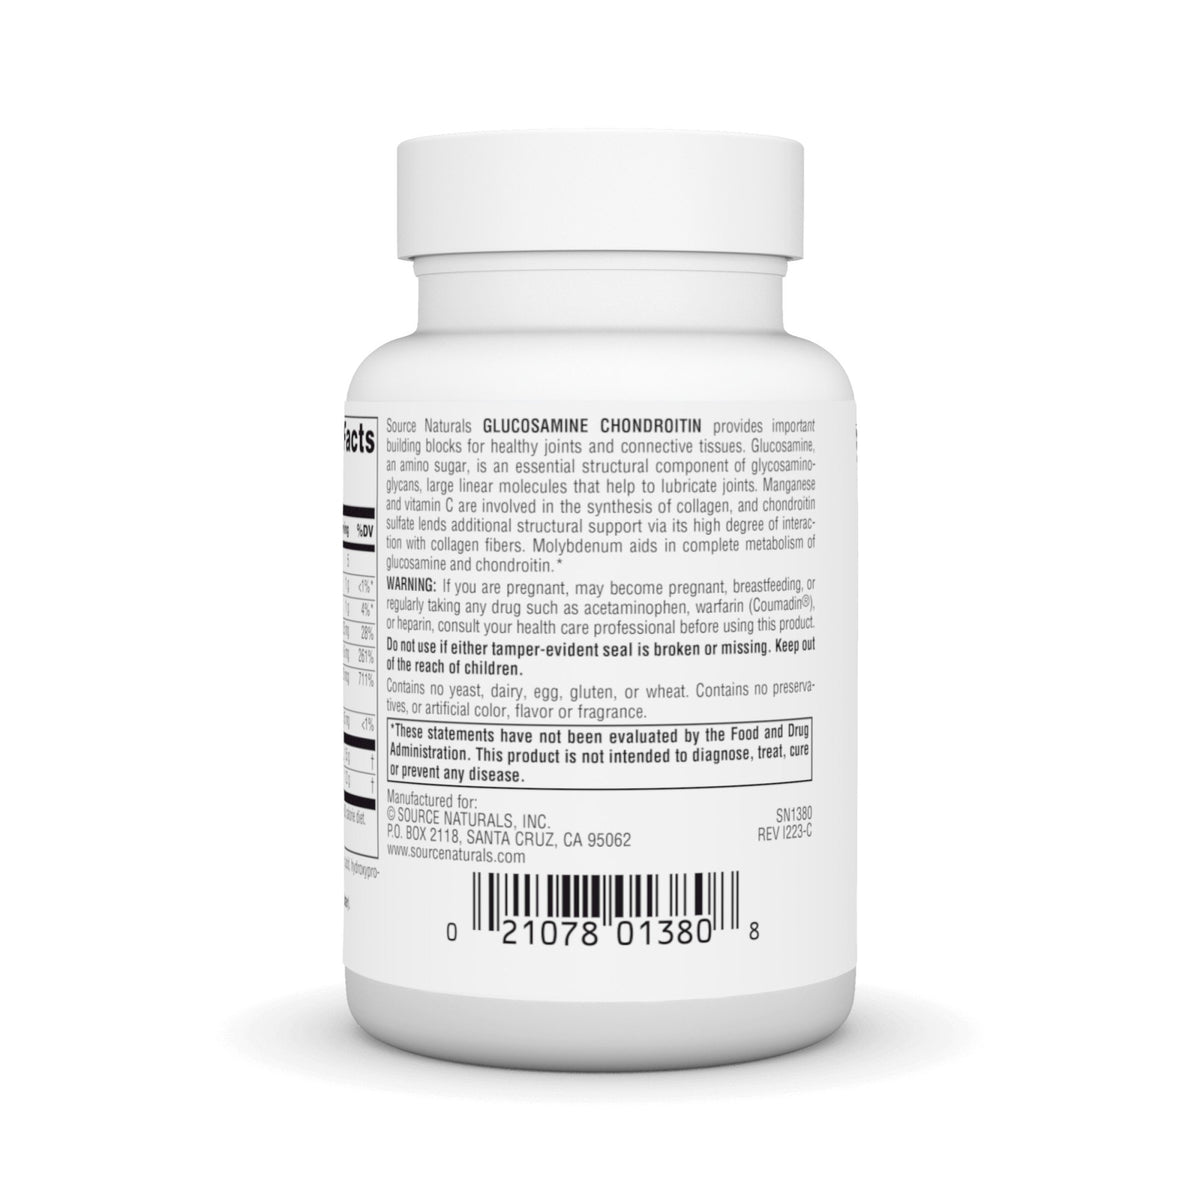 Source Naturals, Inc. Glucosamine Chondroitin Extra Strength 30 Tablet